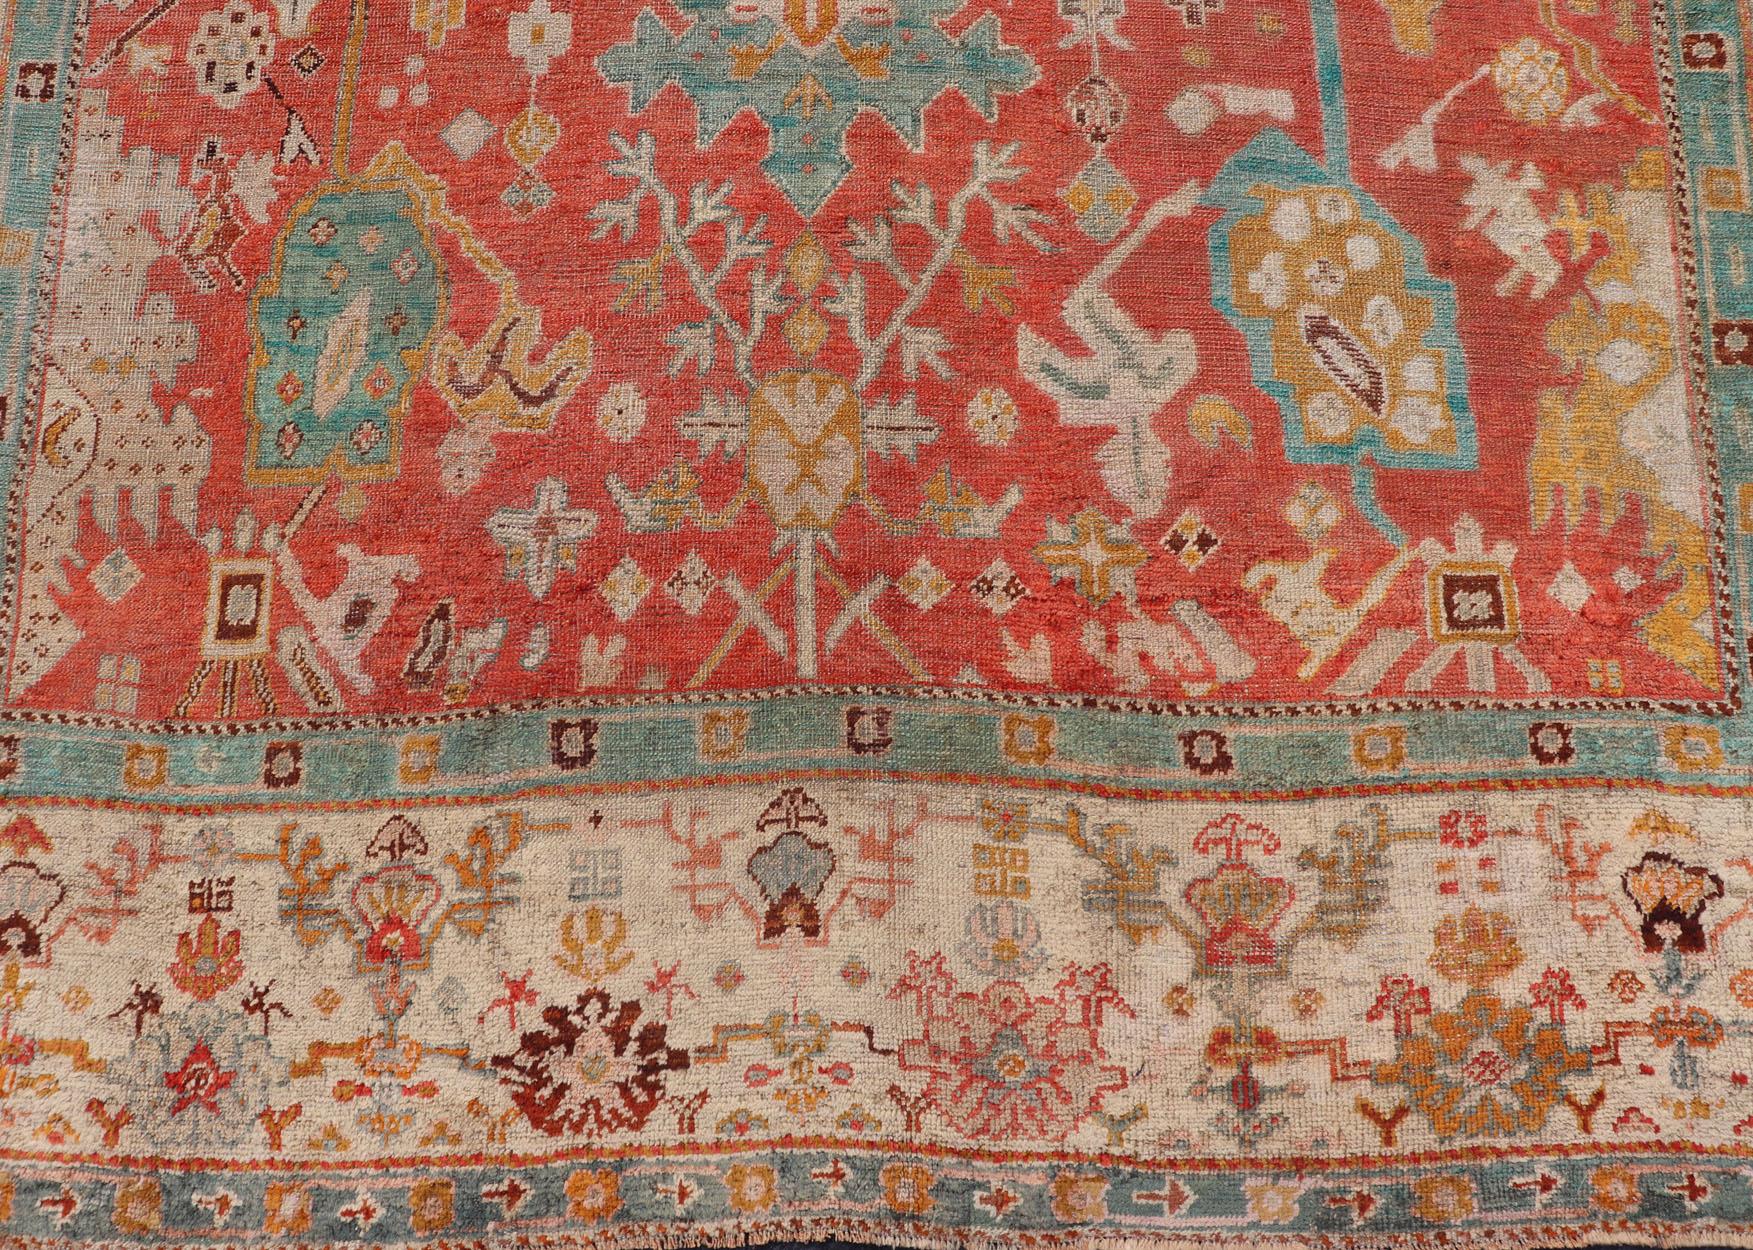 Antique Turkish Oushak In Tribal Motifs in Soft Coral, Blue, Marigold, and Cream For Sale 2